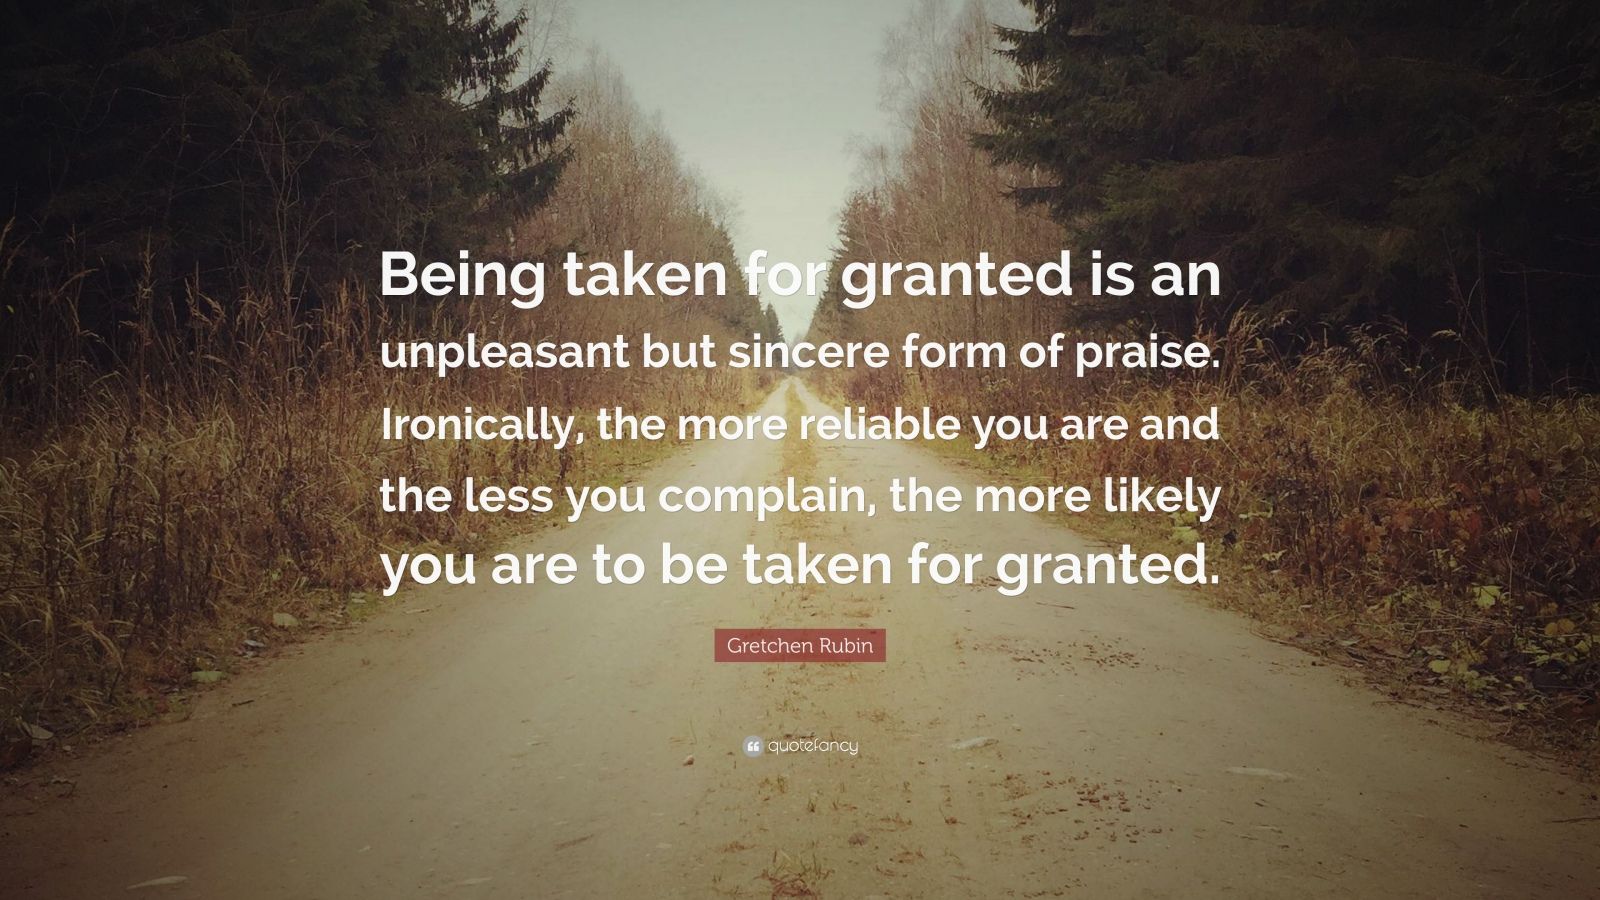 Taken For Granted Quotes : Never Take Someone For Granted, Taking